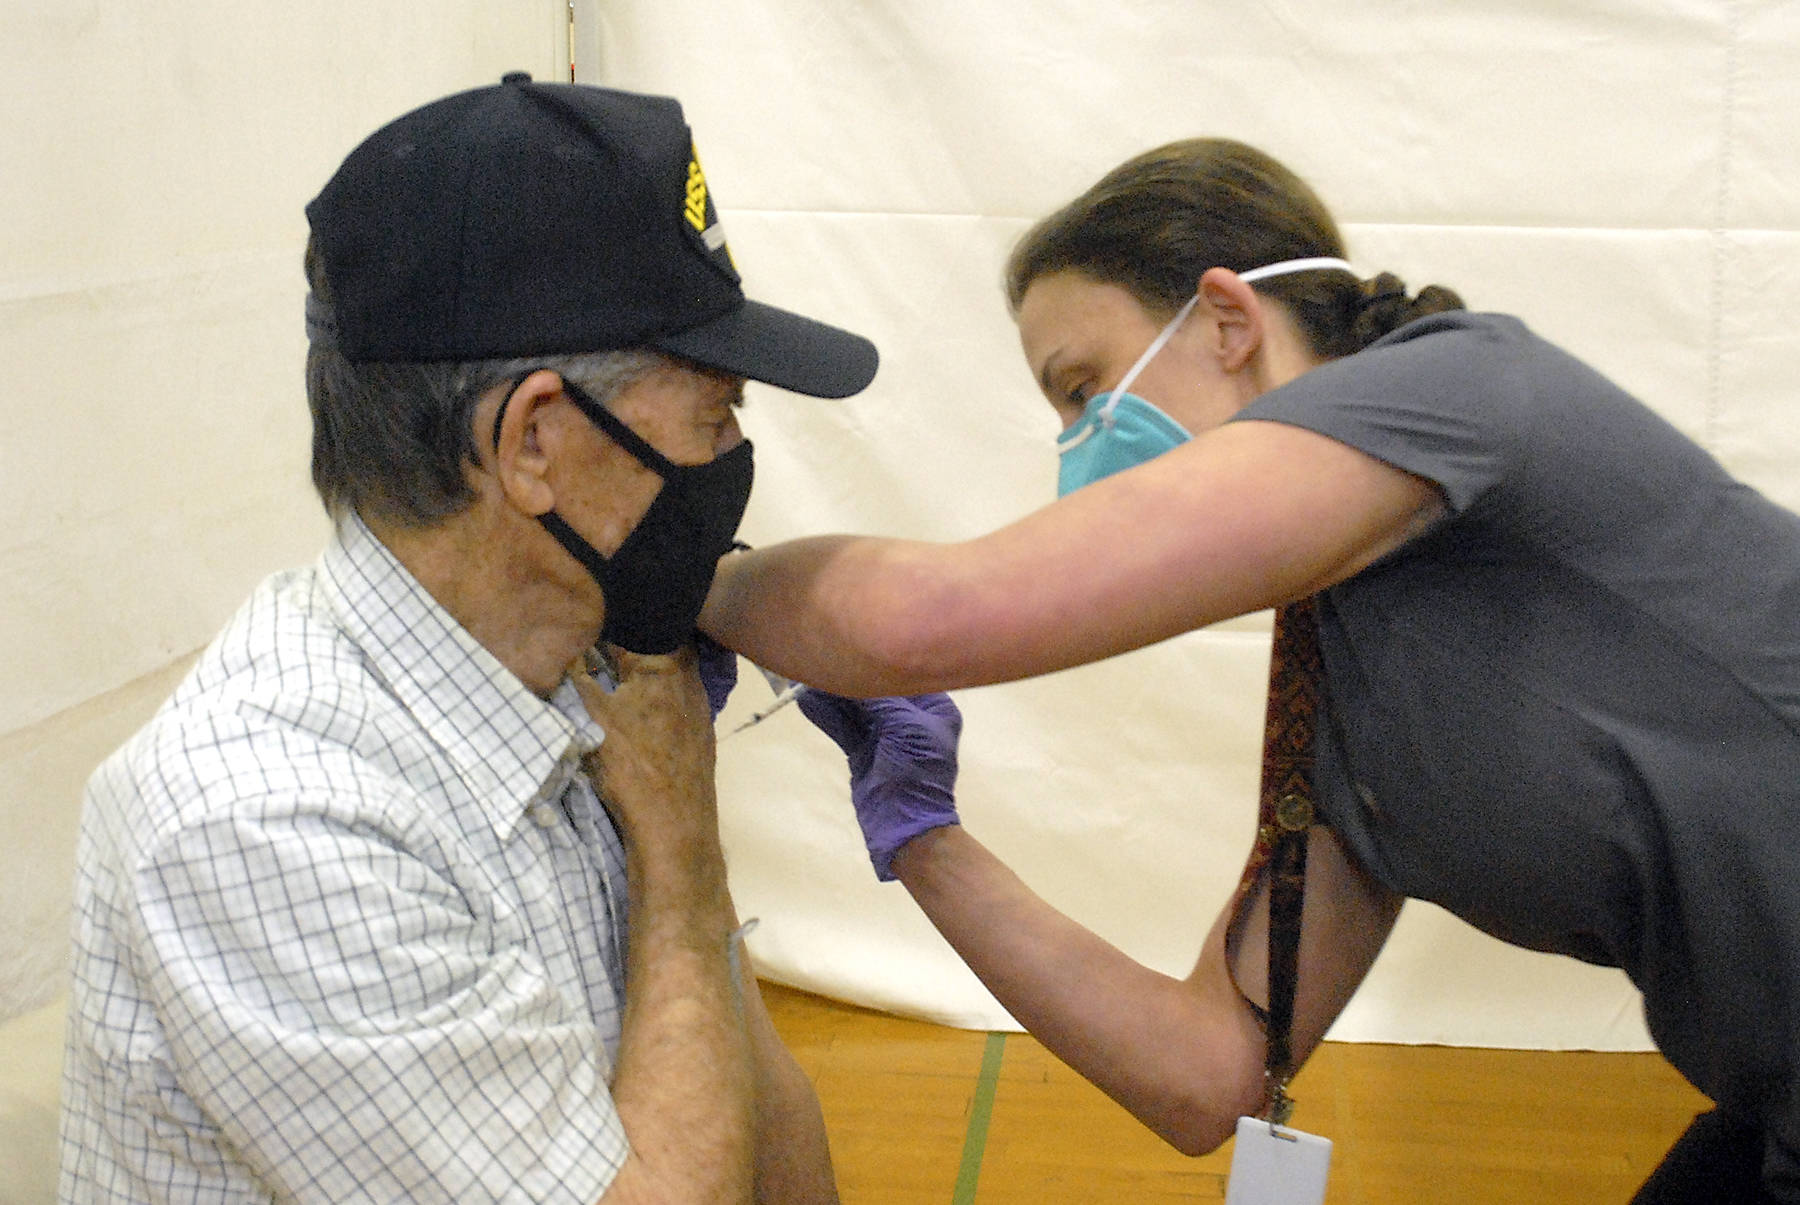 Keith Thorpe/Peninsula Daily News
Bill Chastain of Port Angeles receives a dose of COVID-19 vaccine from Shaina Gonzales of the North Olympc Healthcare Network during Saturday's vaccination clinic at Port Angeles High School.